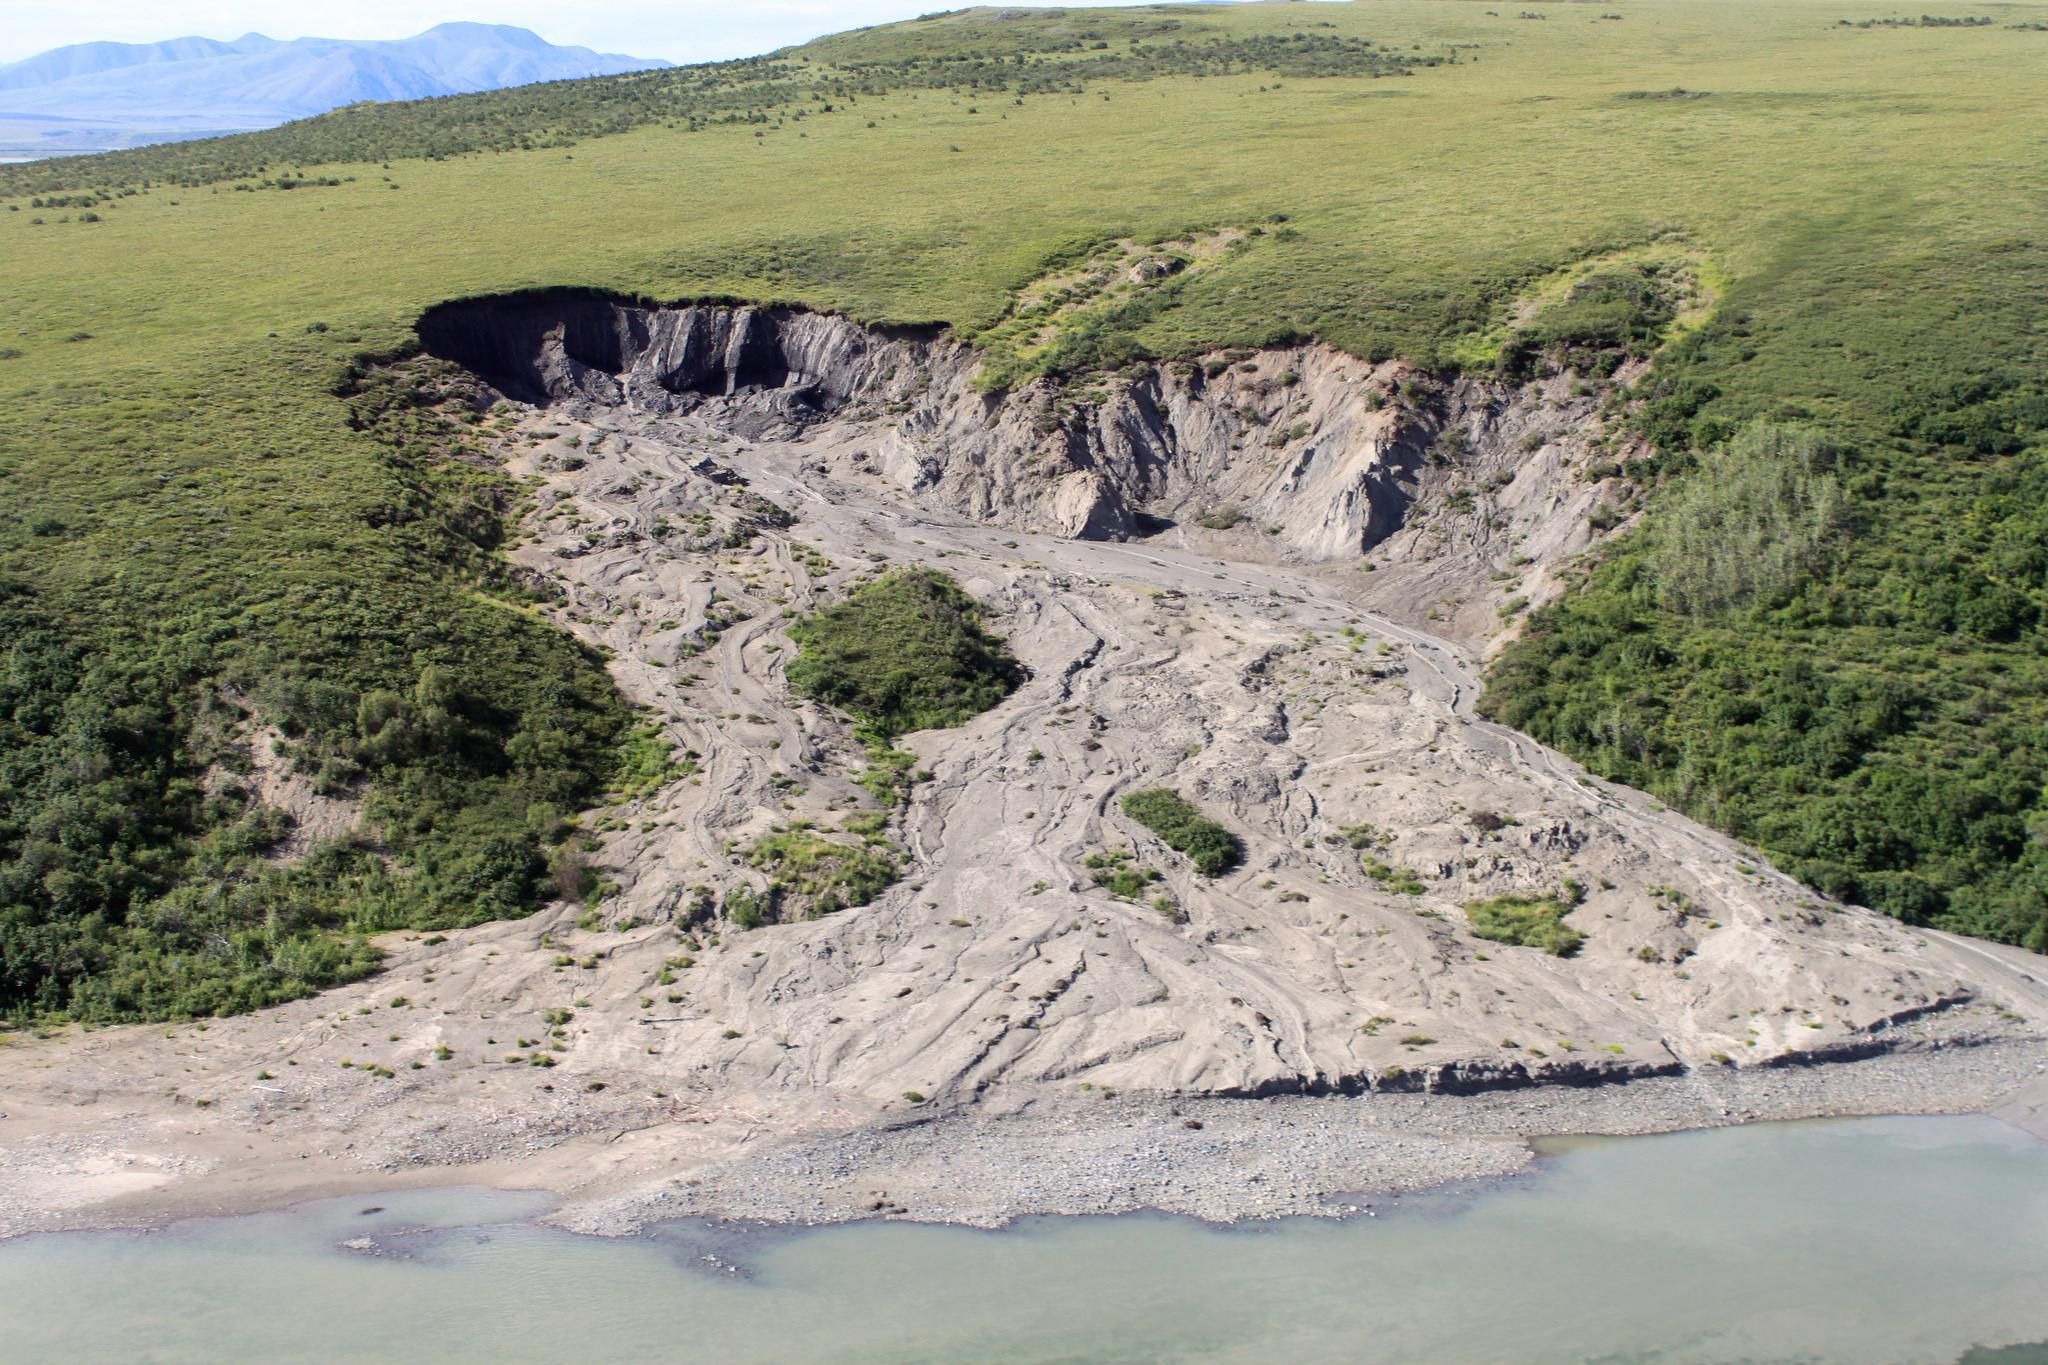 In Noatak National Preserve, Alaska, an exceptionally warm summer in 2004 triggered this 300m long slump associated with thawing permafrost.